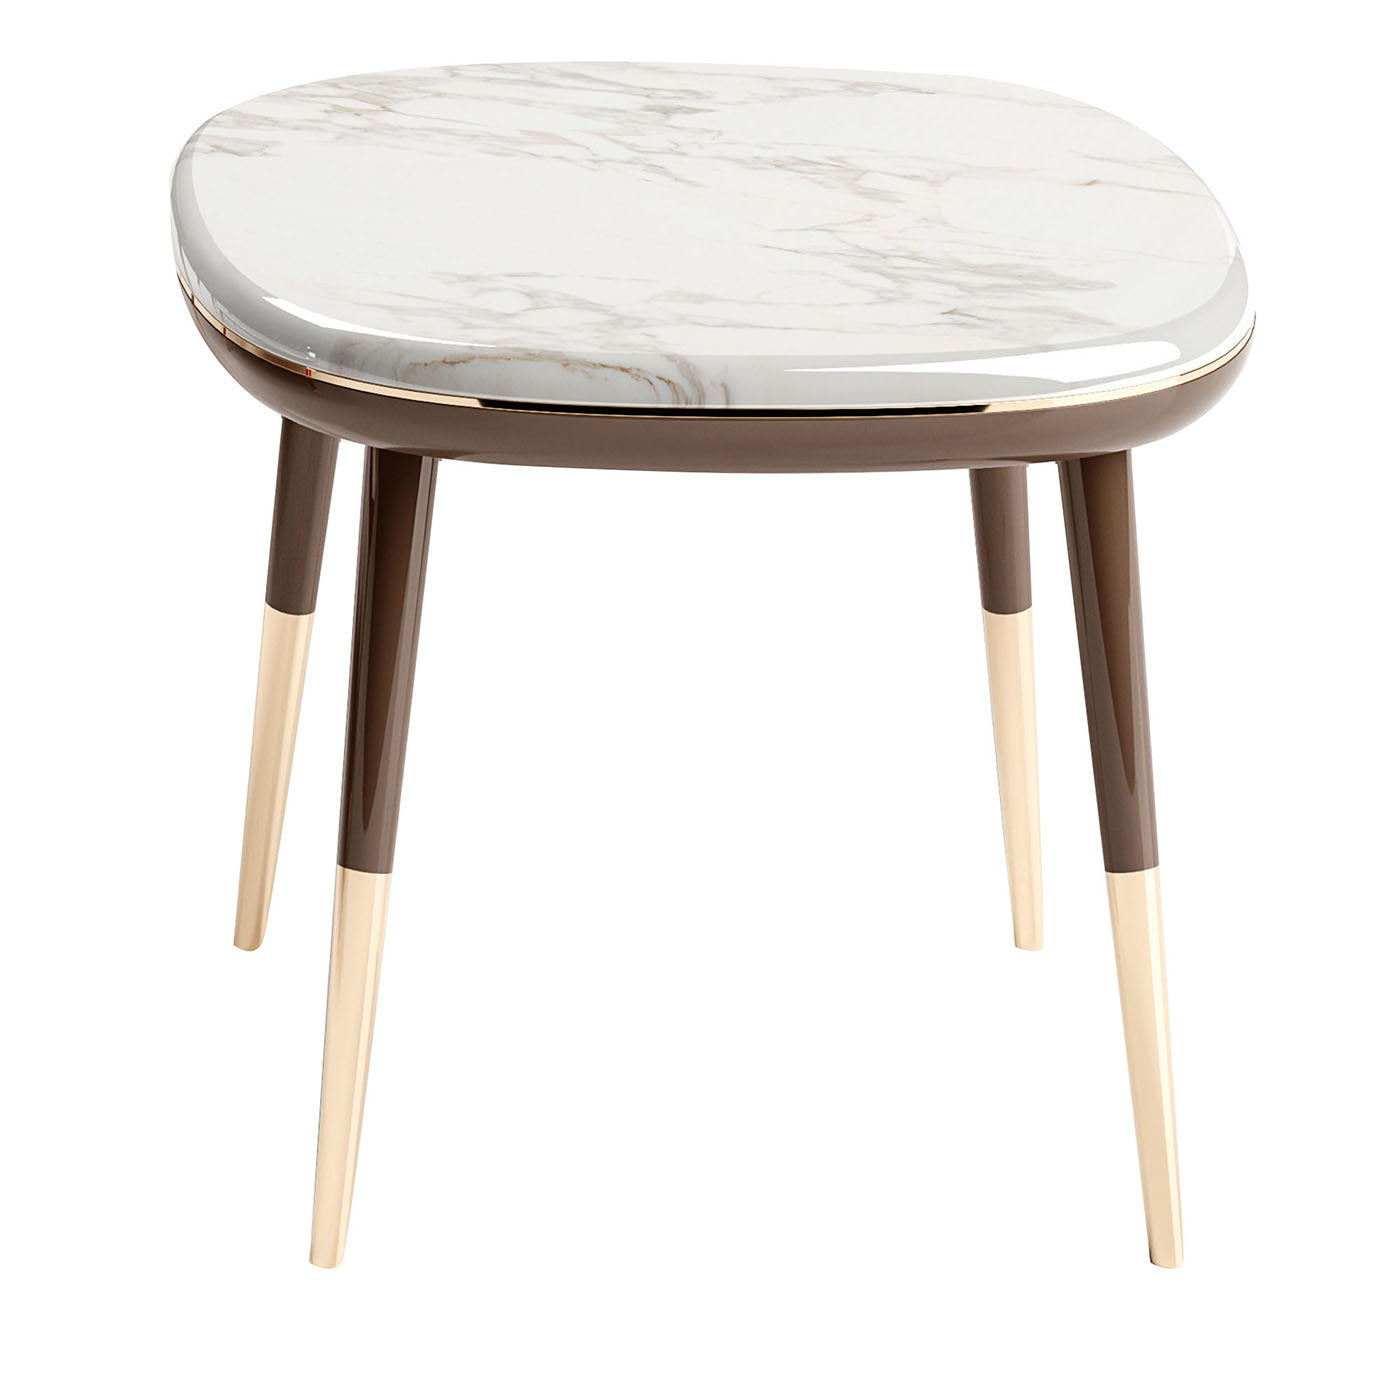 Sabrina Brown Side Table with Marble Top - Main view